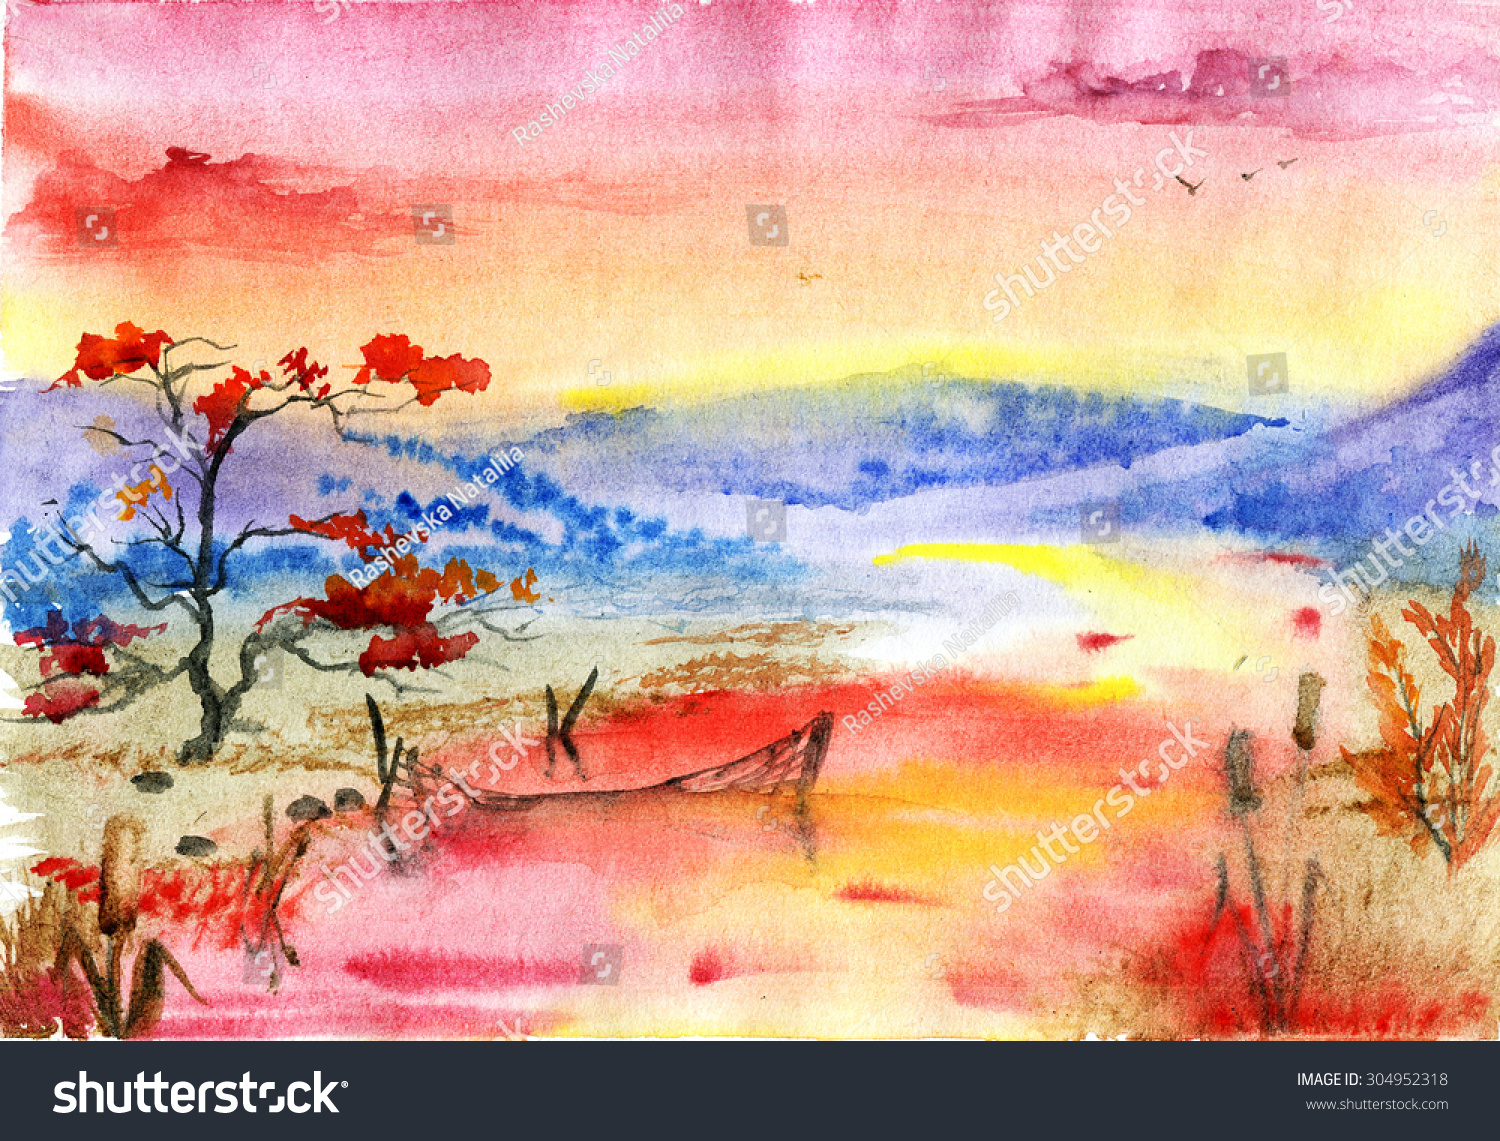 Sunset Mountains River Drawing Water Color Stock Illustration